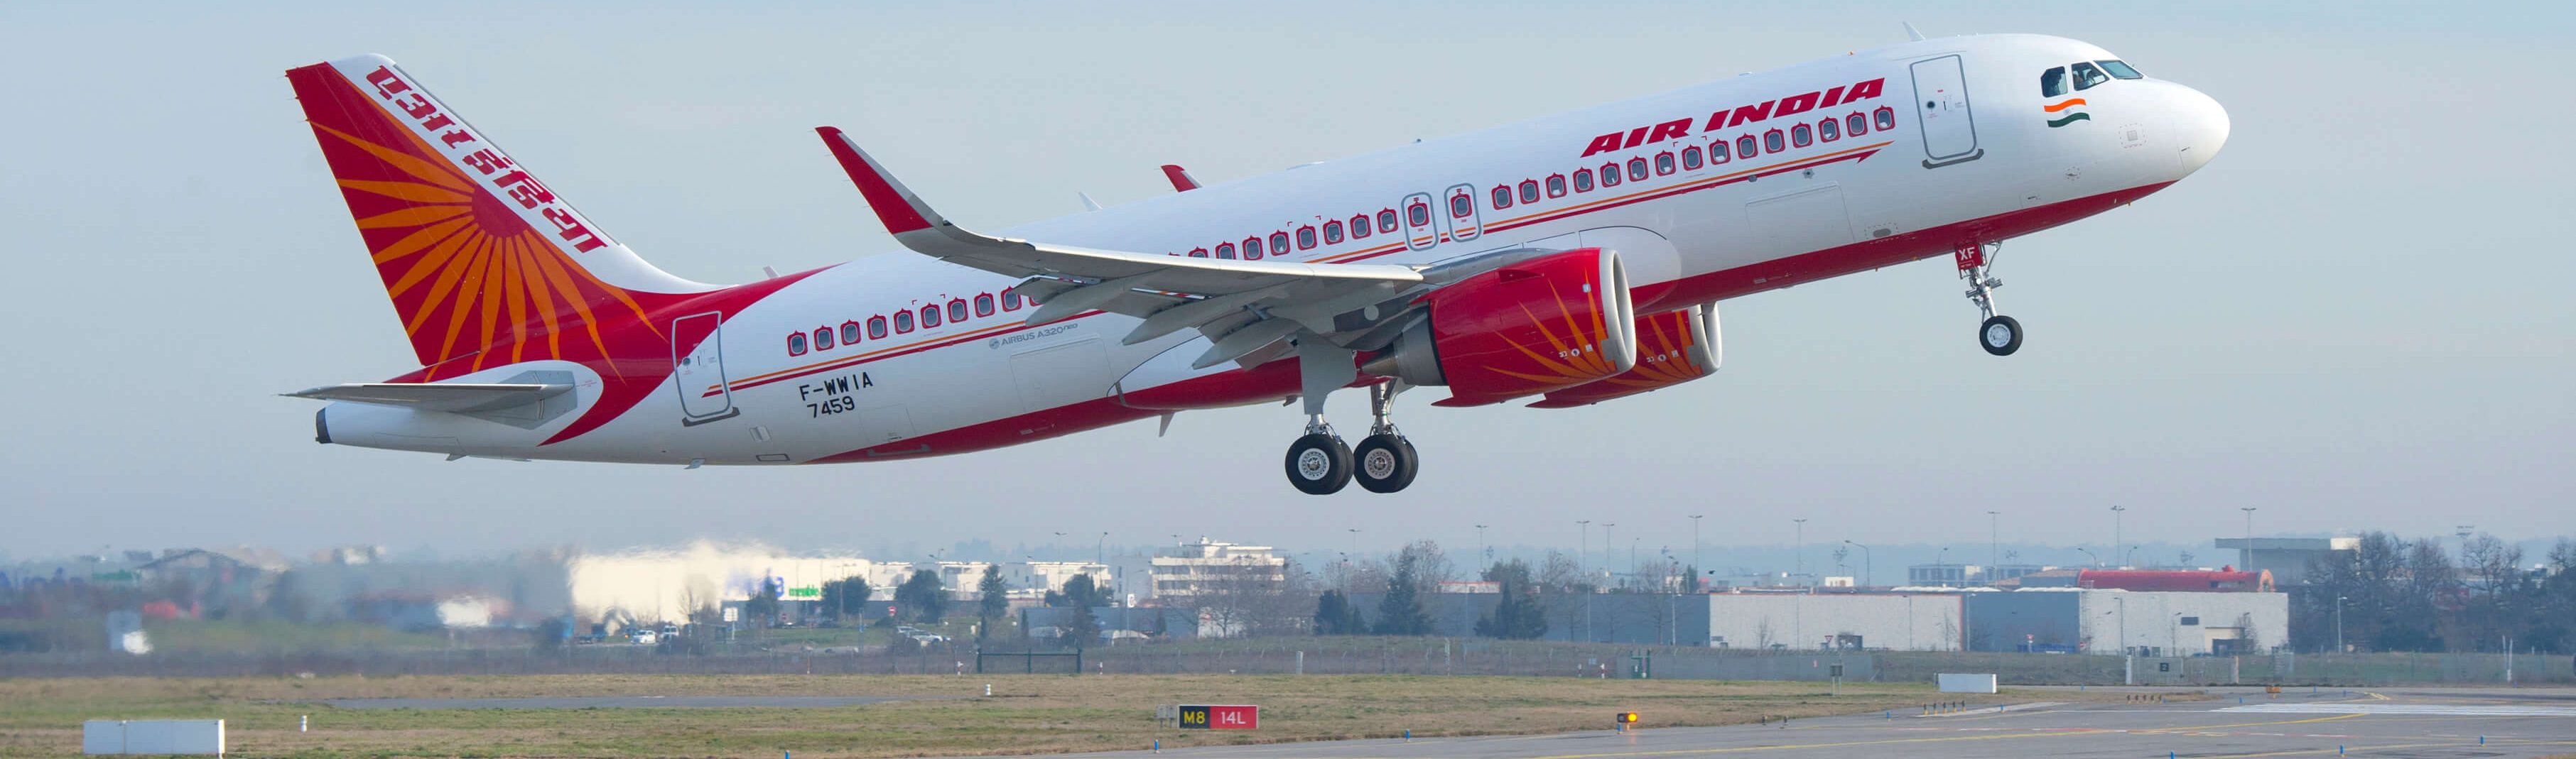 Travelport wins tender for sole distribution supplier to Air India